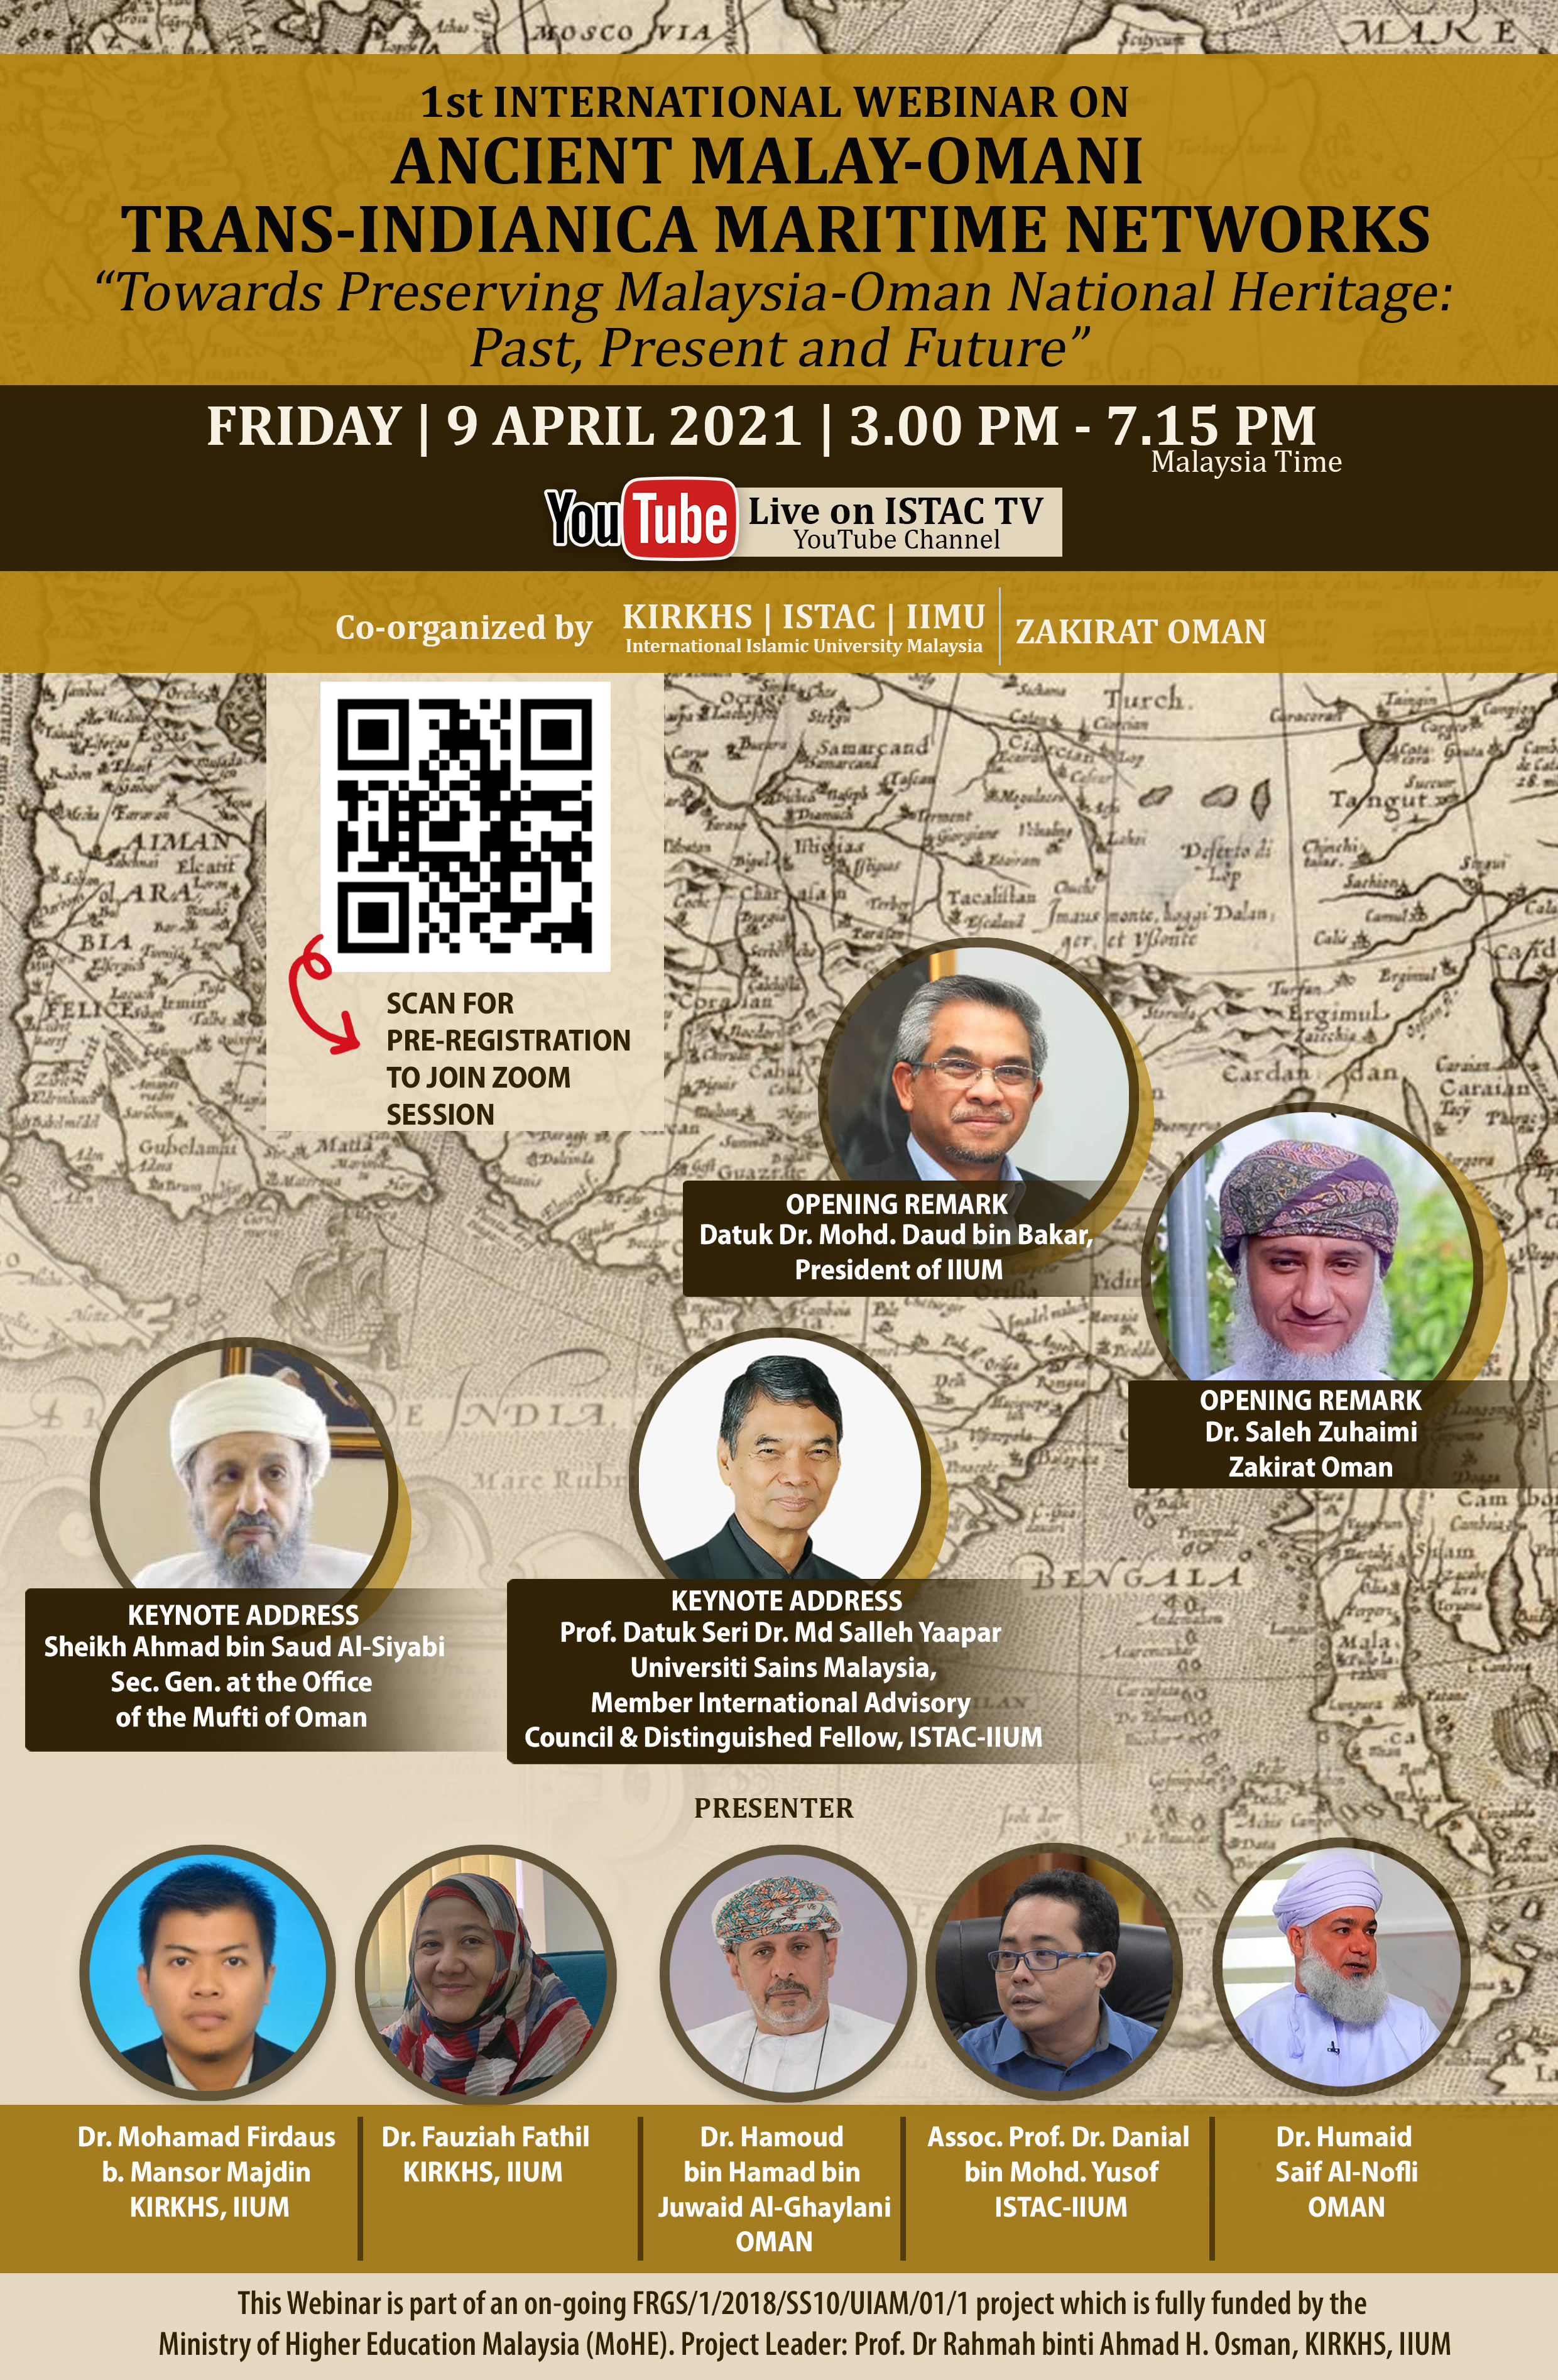 1st INTERNATIONAL WEBINAR ON ANCIENT MALAY-OMANI TRANS-INDIANICA MARITIME NETWORK "Towards Preserving Malaysia-Oman National Heritage: Past, Present and Future"